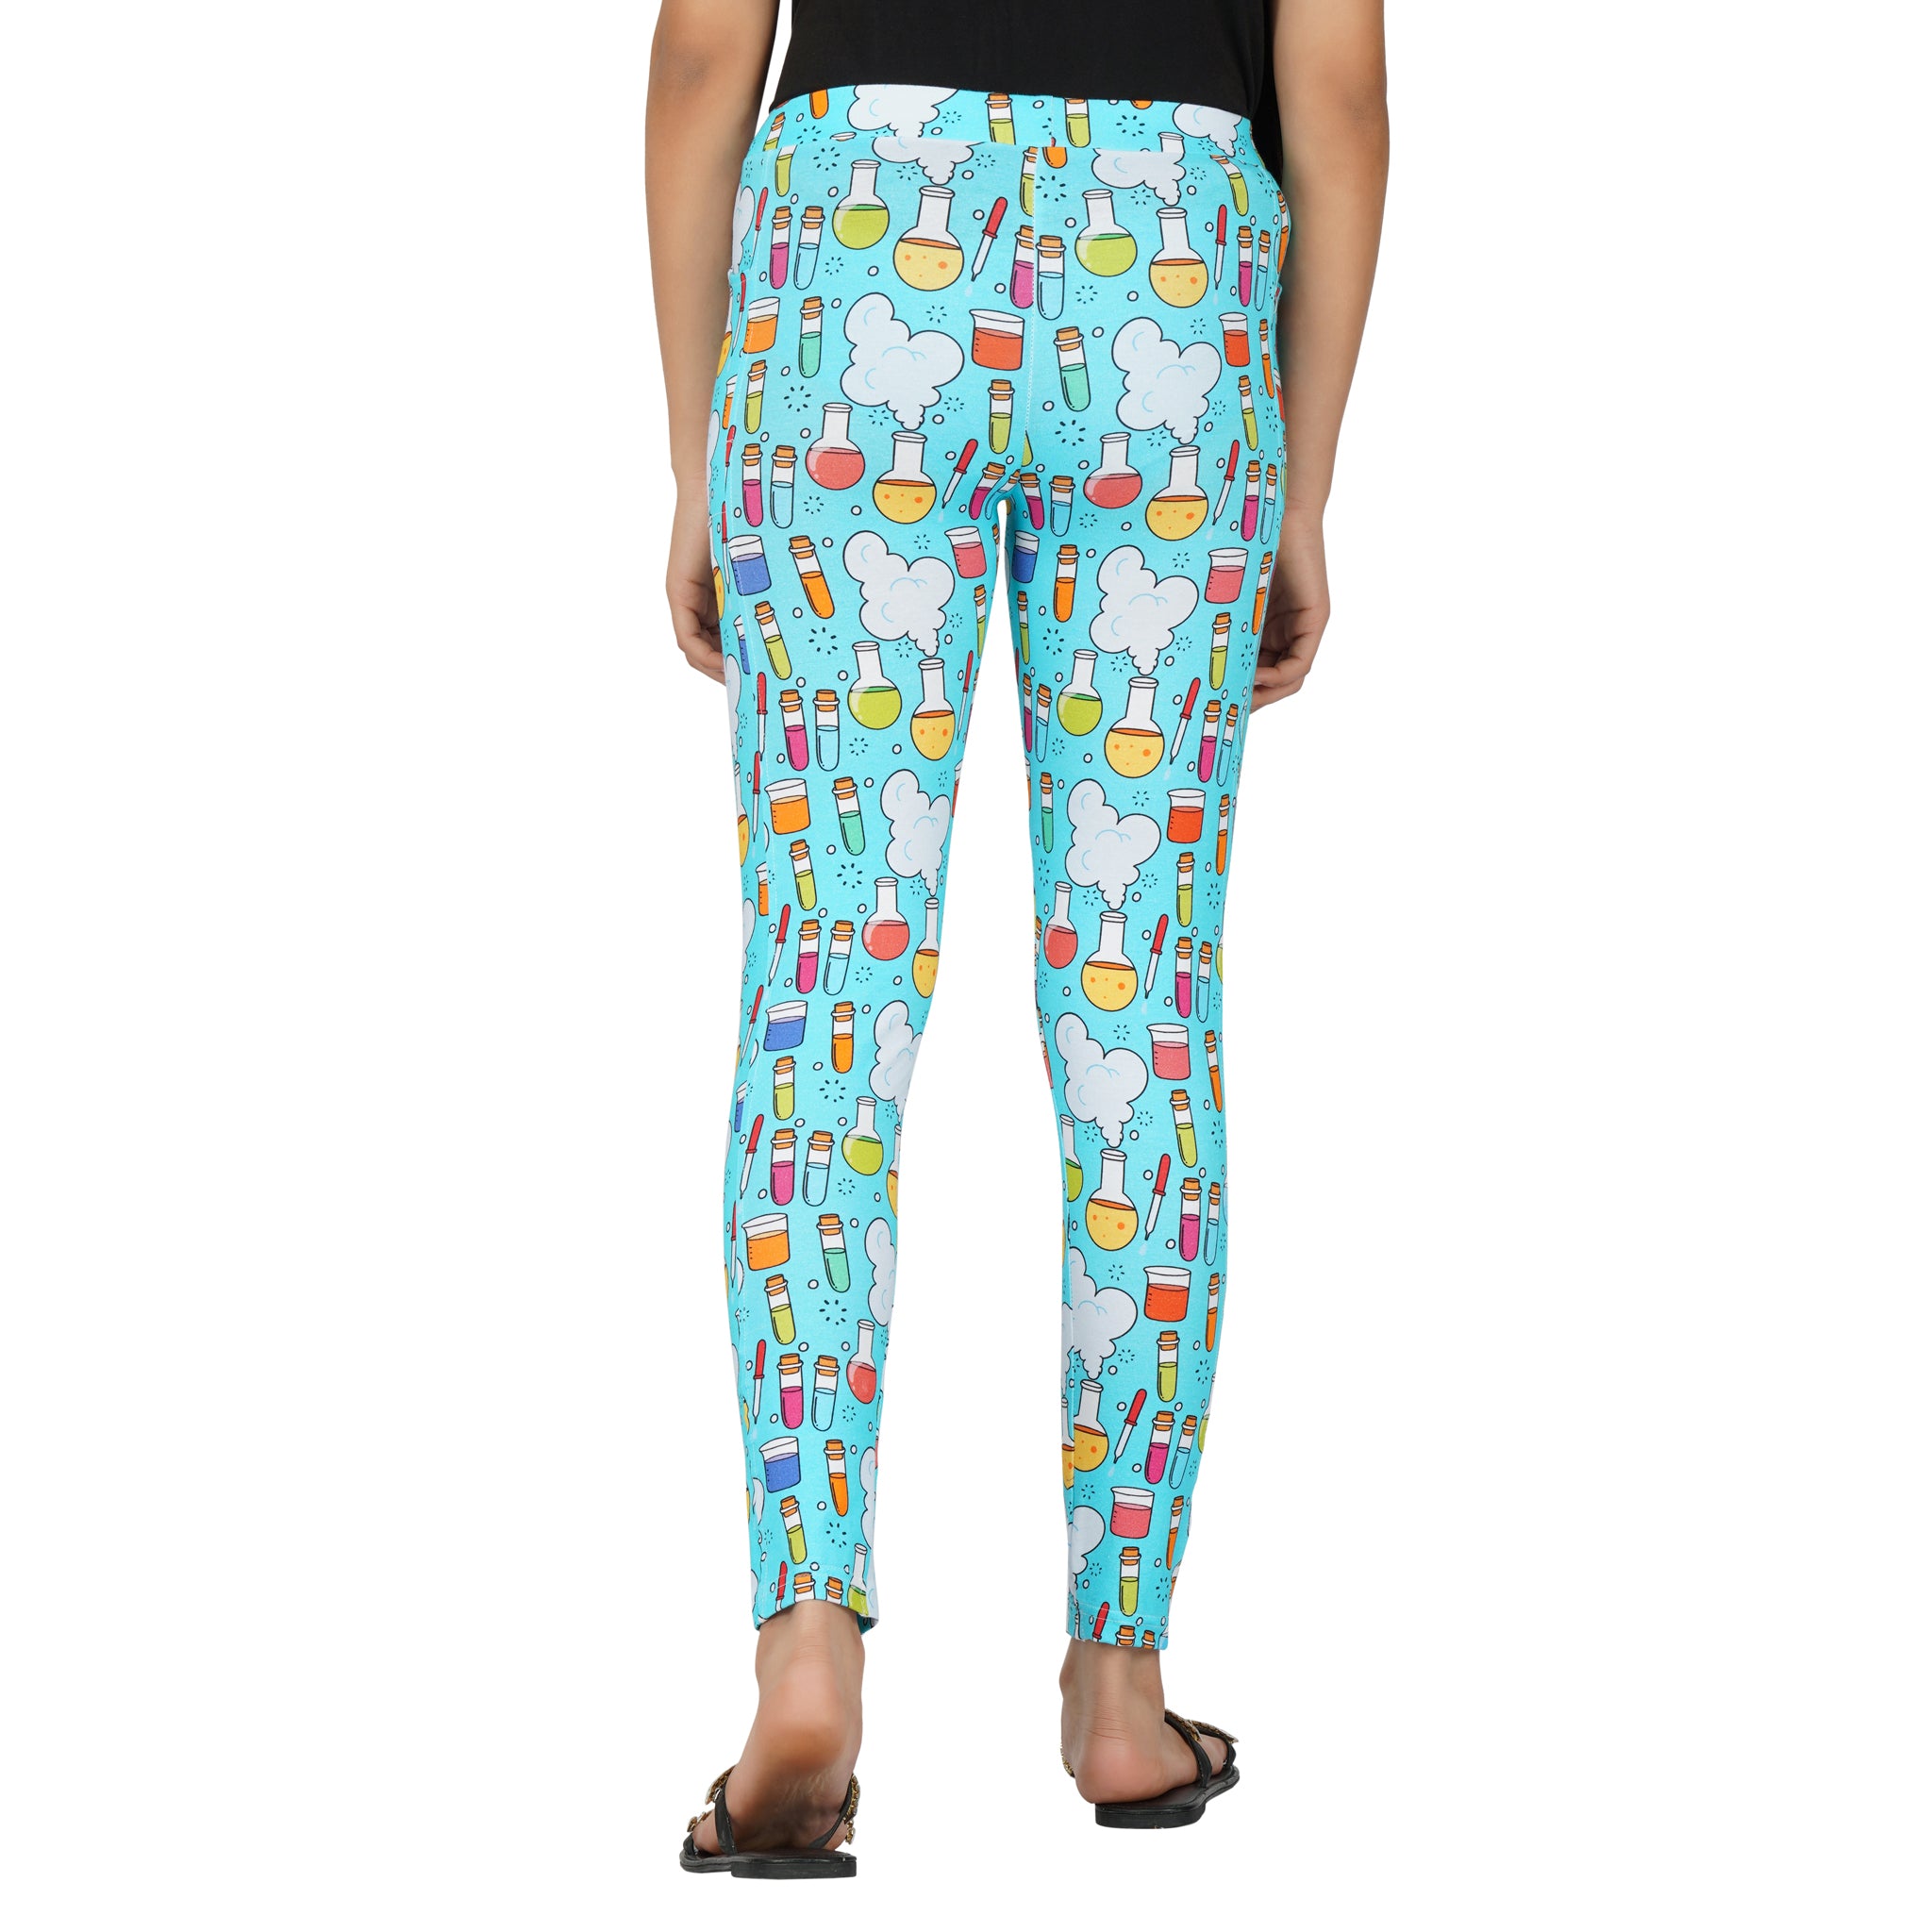 Science Equipment Kids Leggings with Pockets